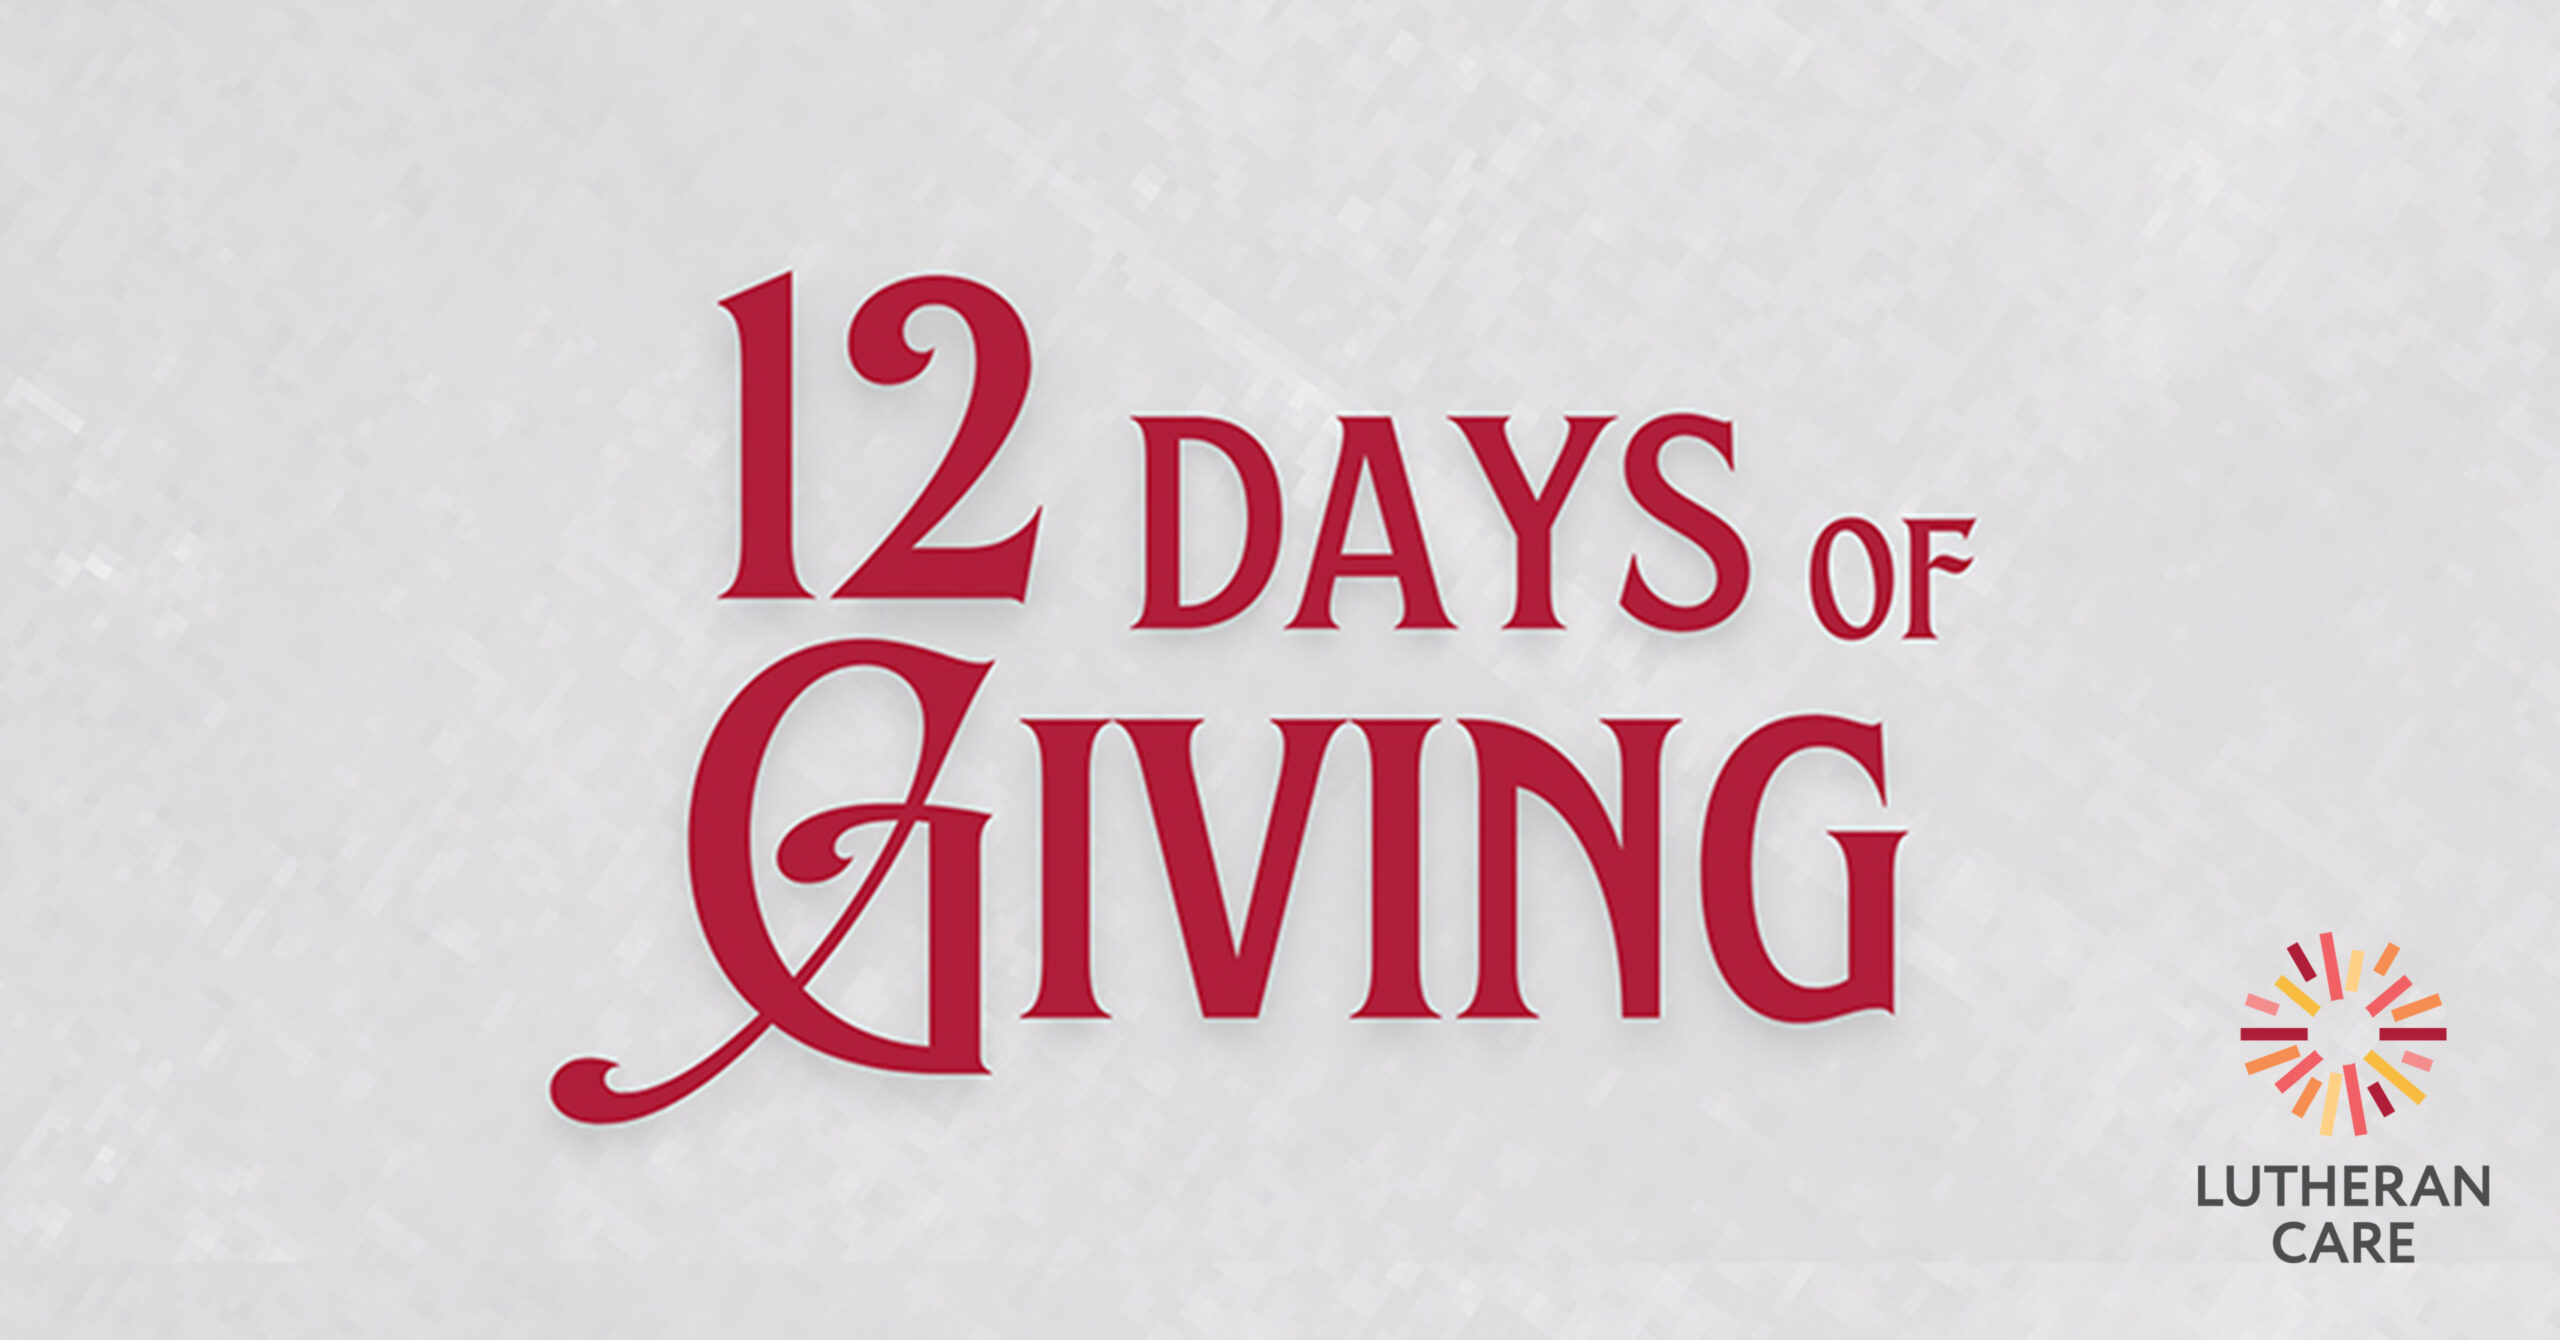 Text says 12 Days of Giving. The Lutheran Care logo appears in the bottom right hand corner.